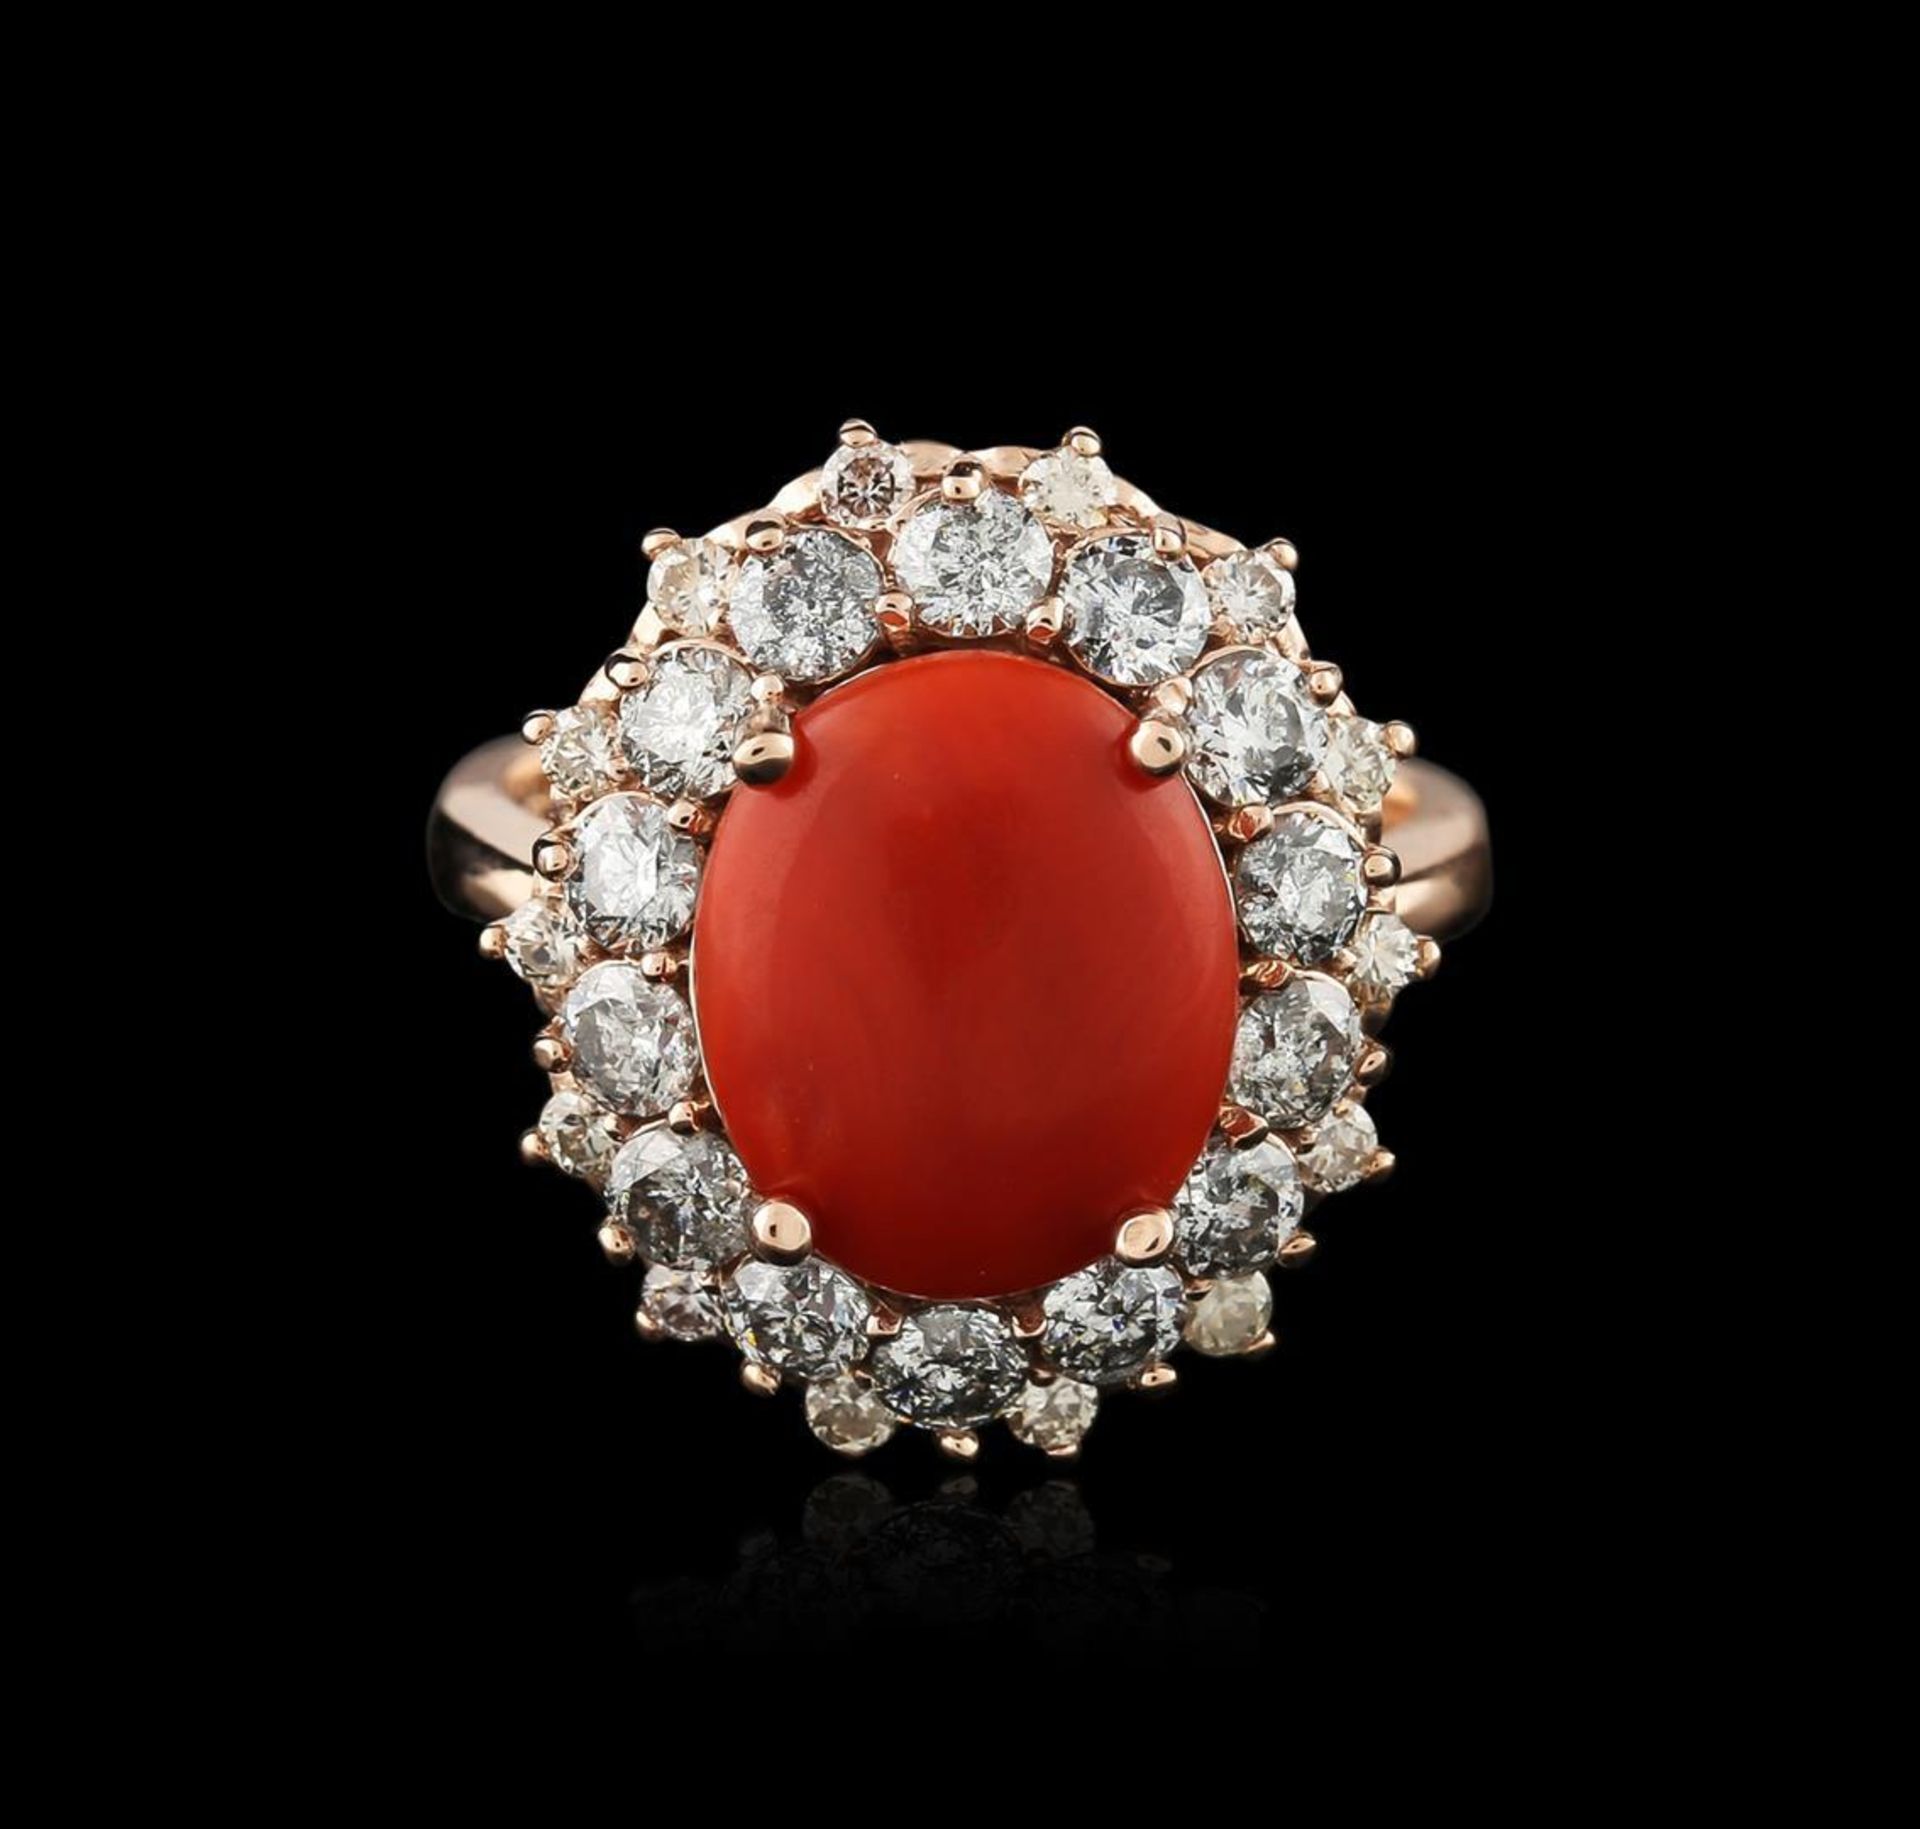 14KT Rose Gold 8.88 ctw Coral and Diamond Ring - Image 2 of 3